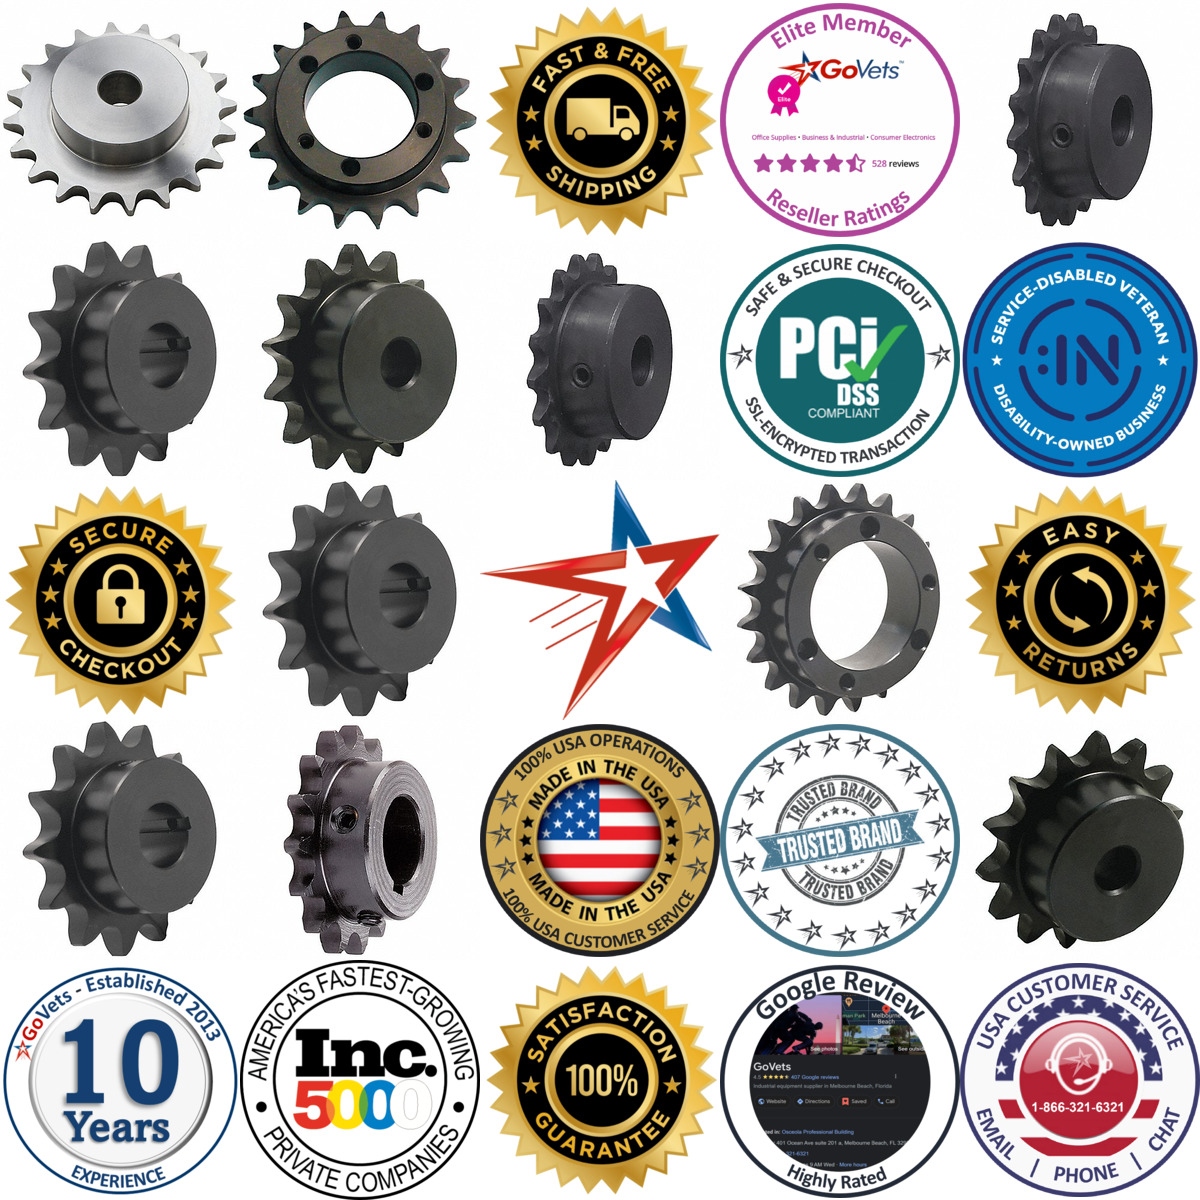 A selection of Sprockets products on GoVets